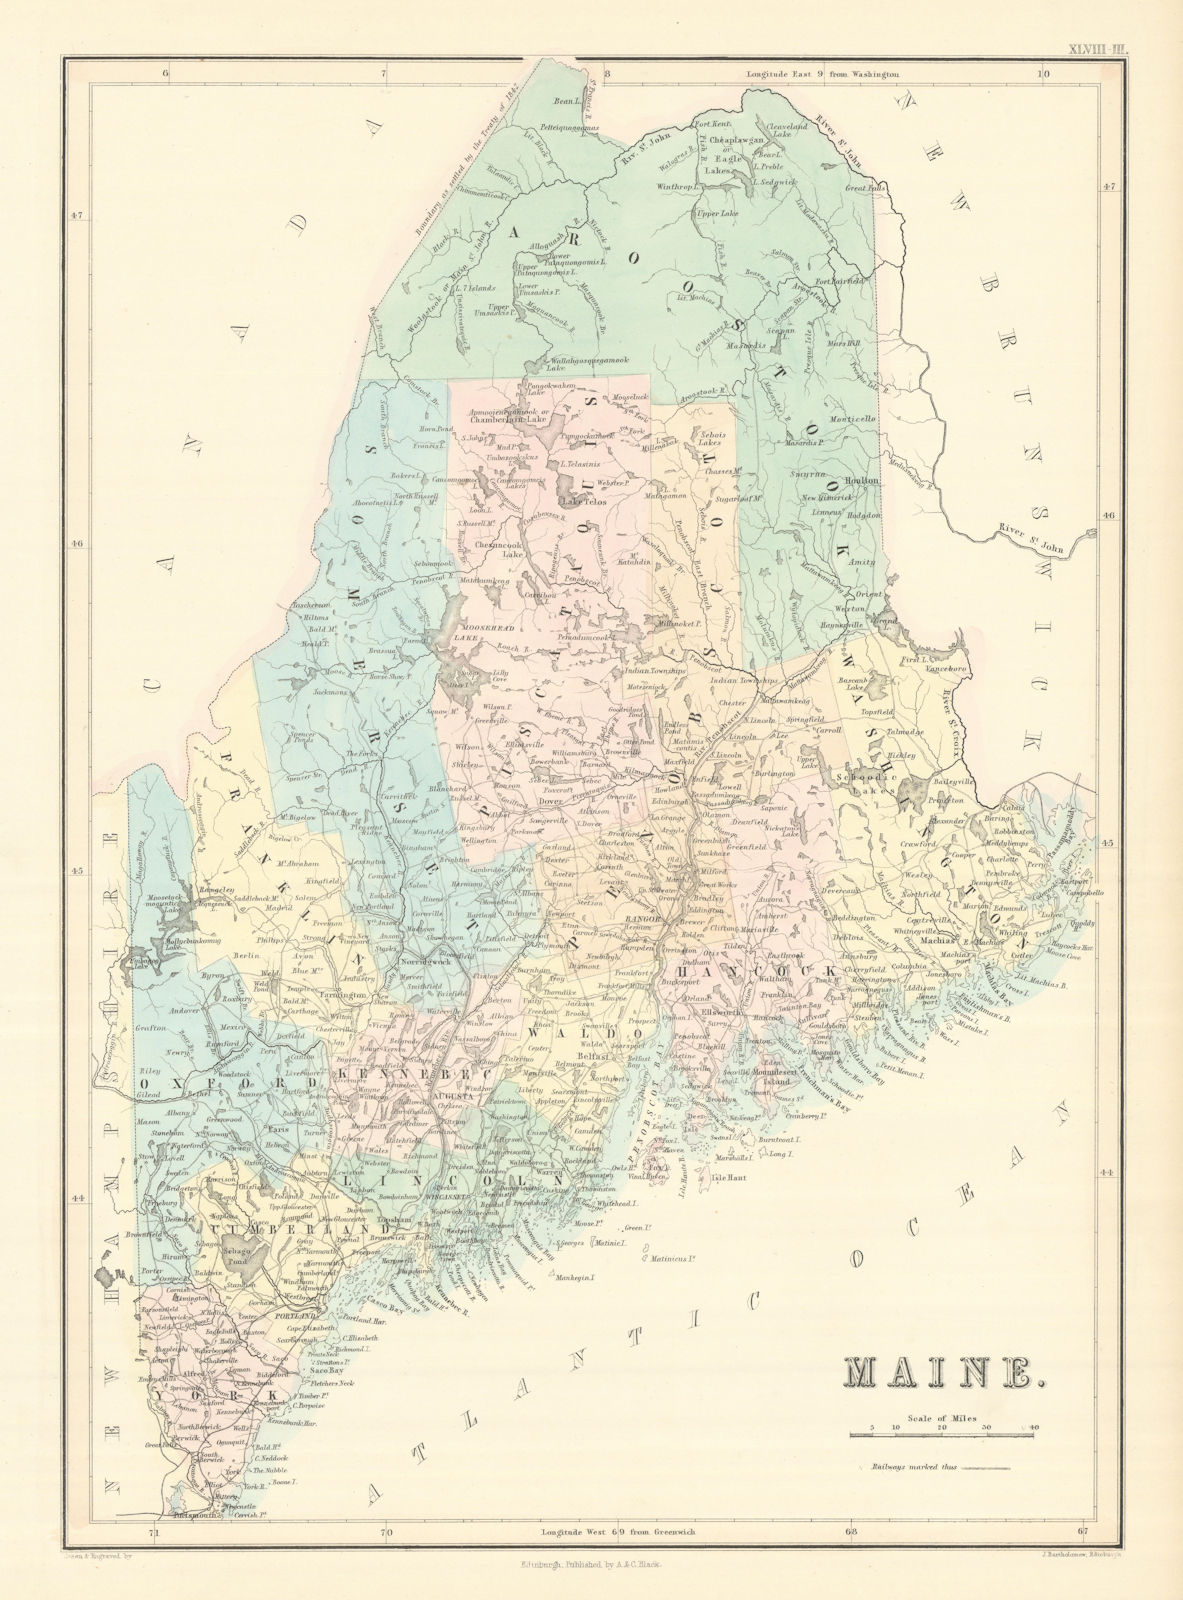 Maine state map showing counties. JOHN BARTHOLOMEW 1854 old antique chart